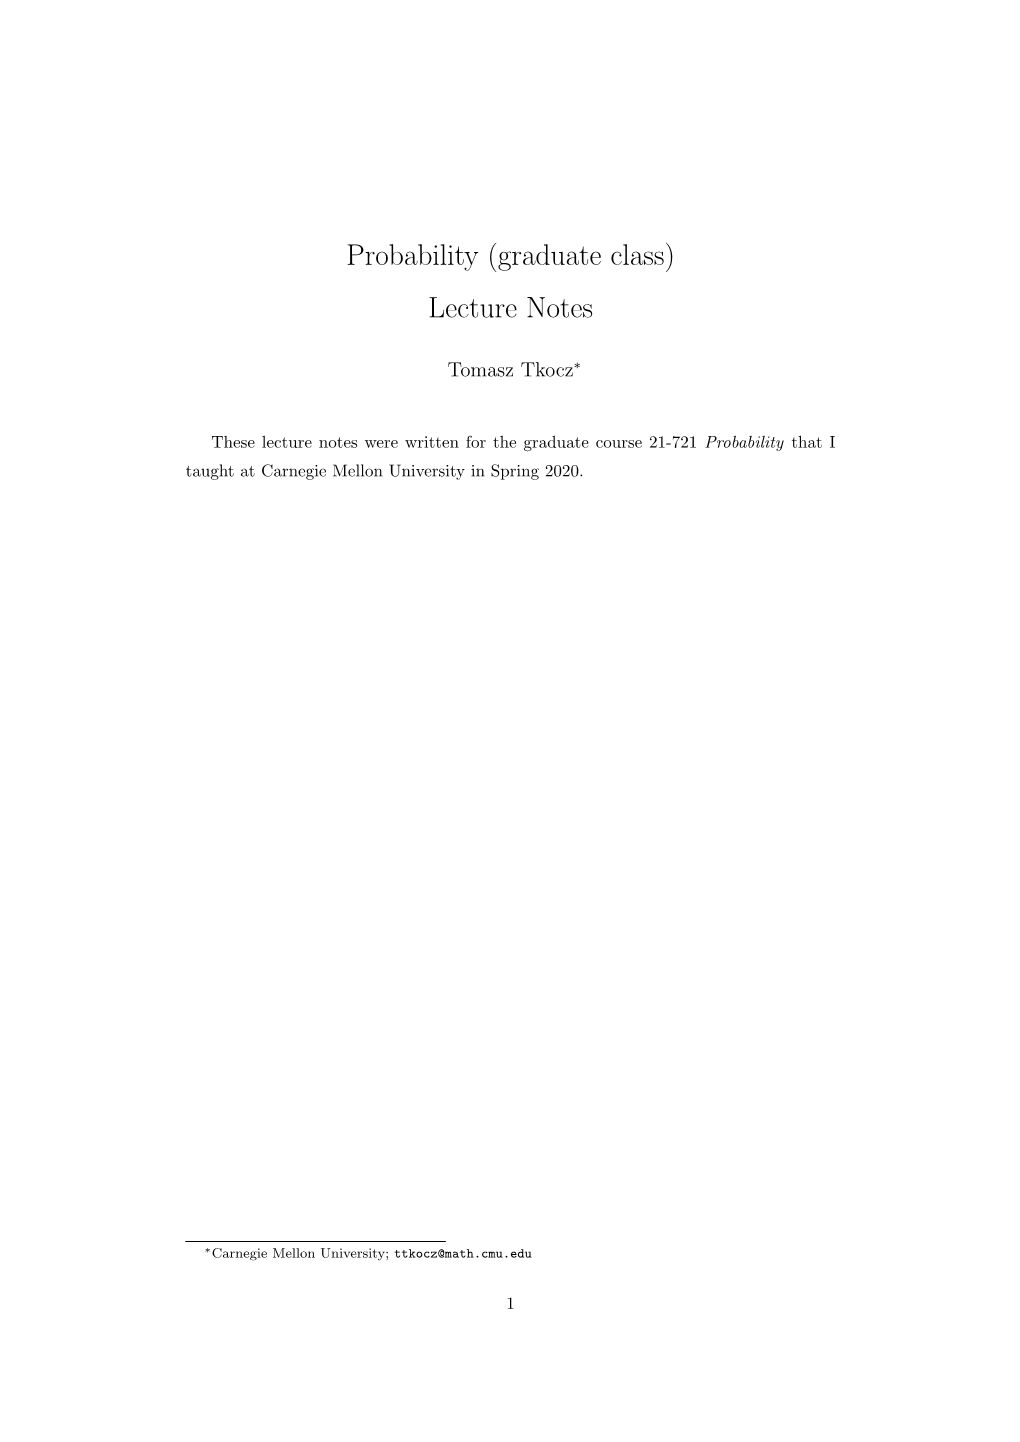 Probability (Graduate Class) Lecture Notes